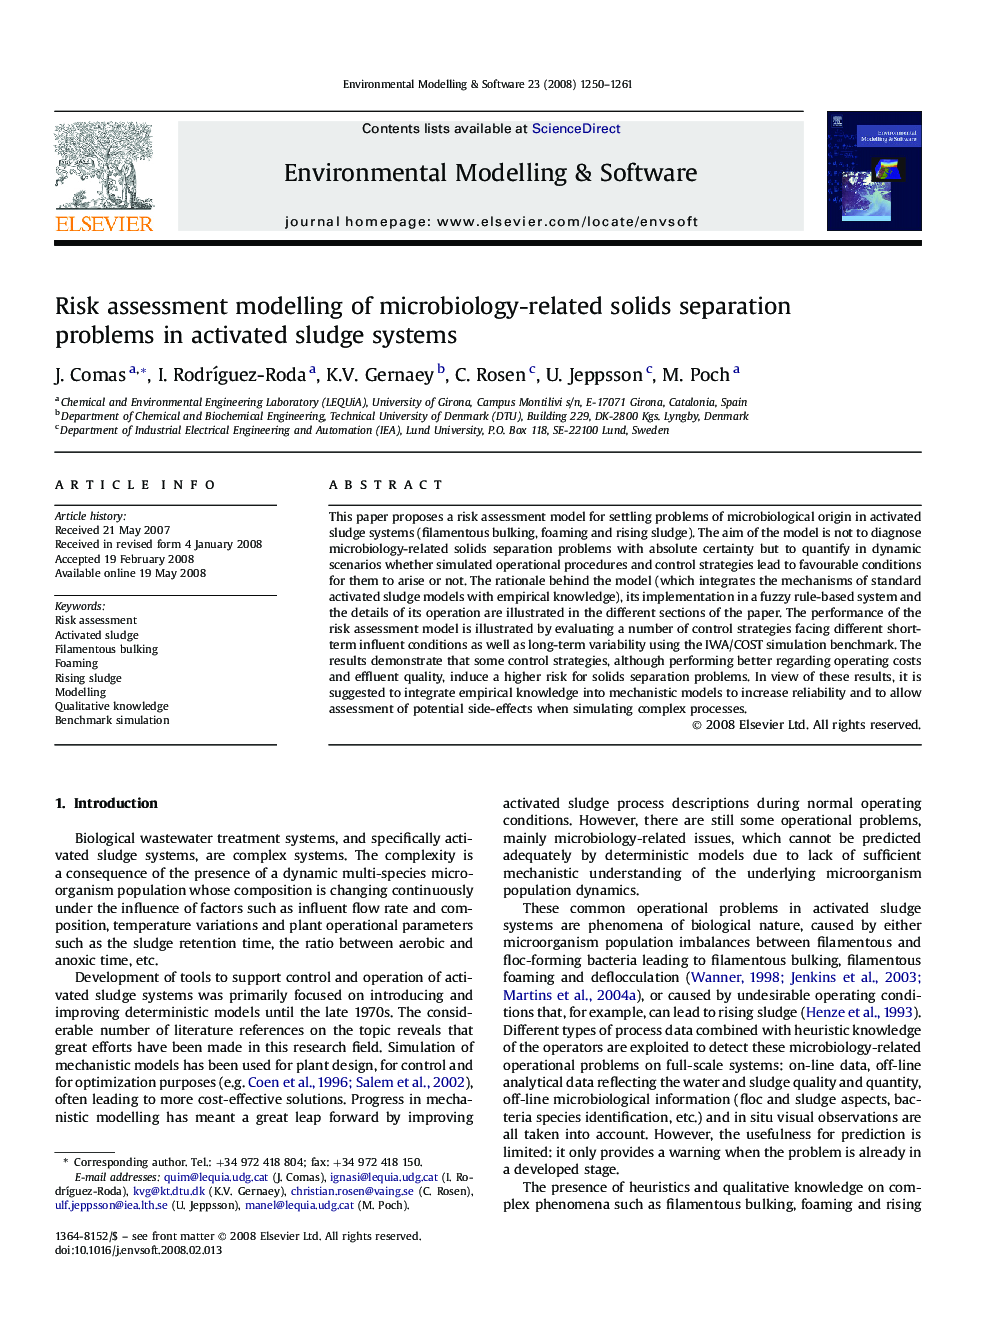 Risk assessment modelling of microbiology-related solids separation problems in activated sludge systems